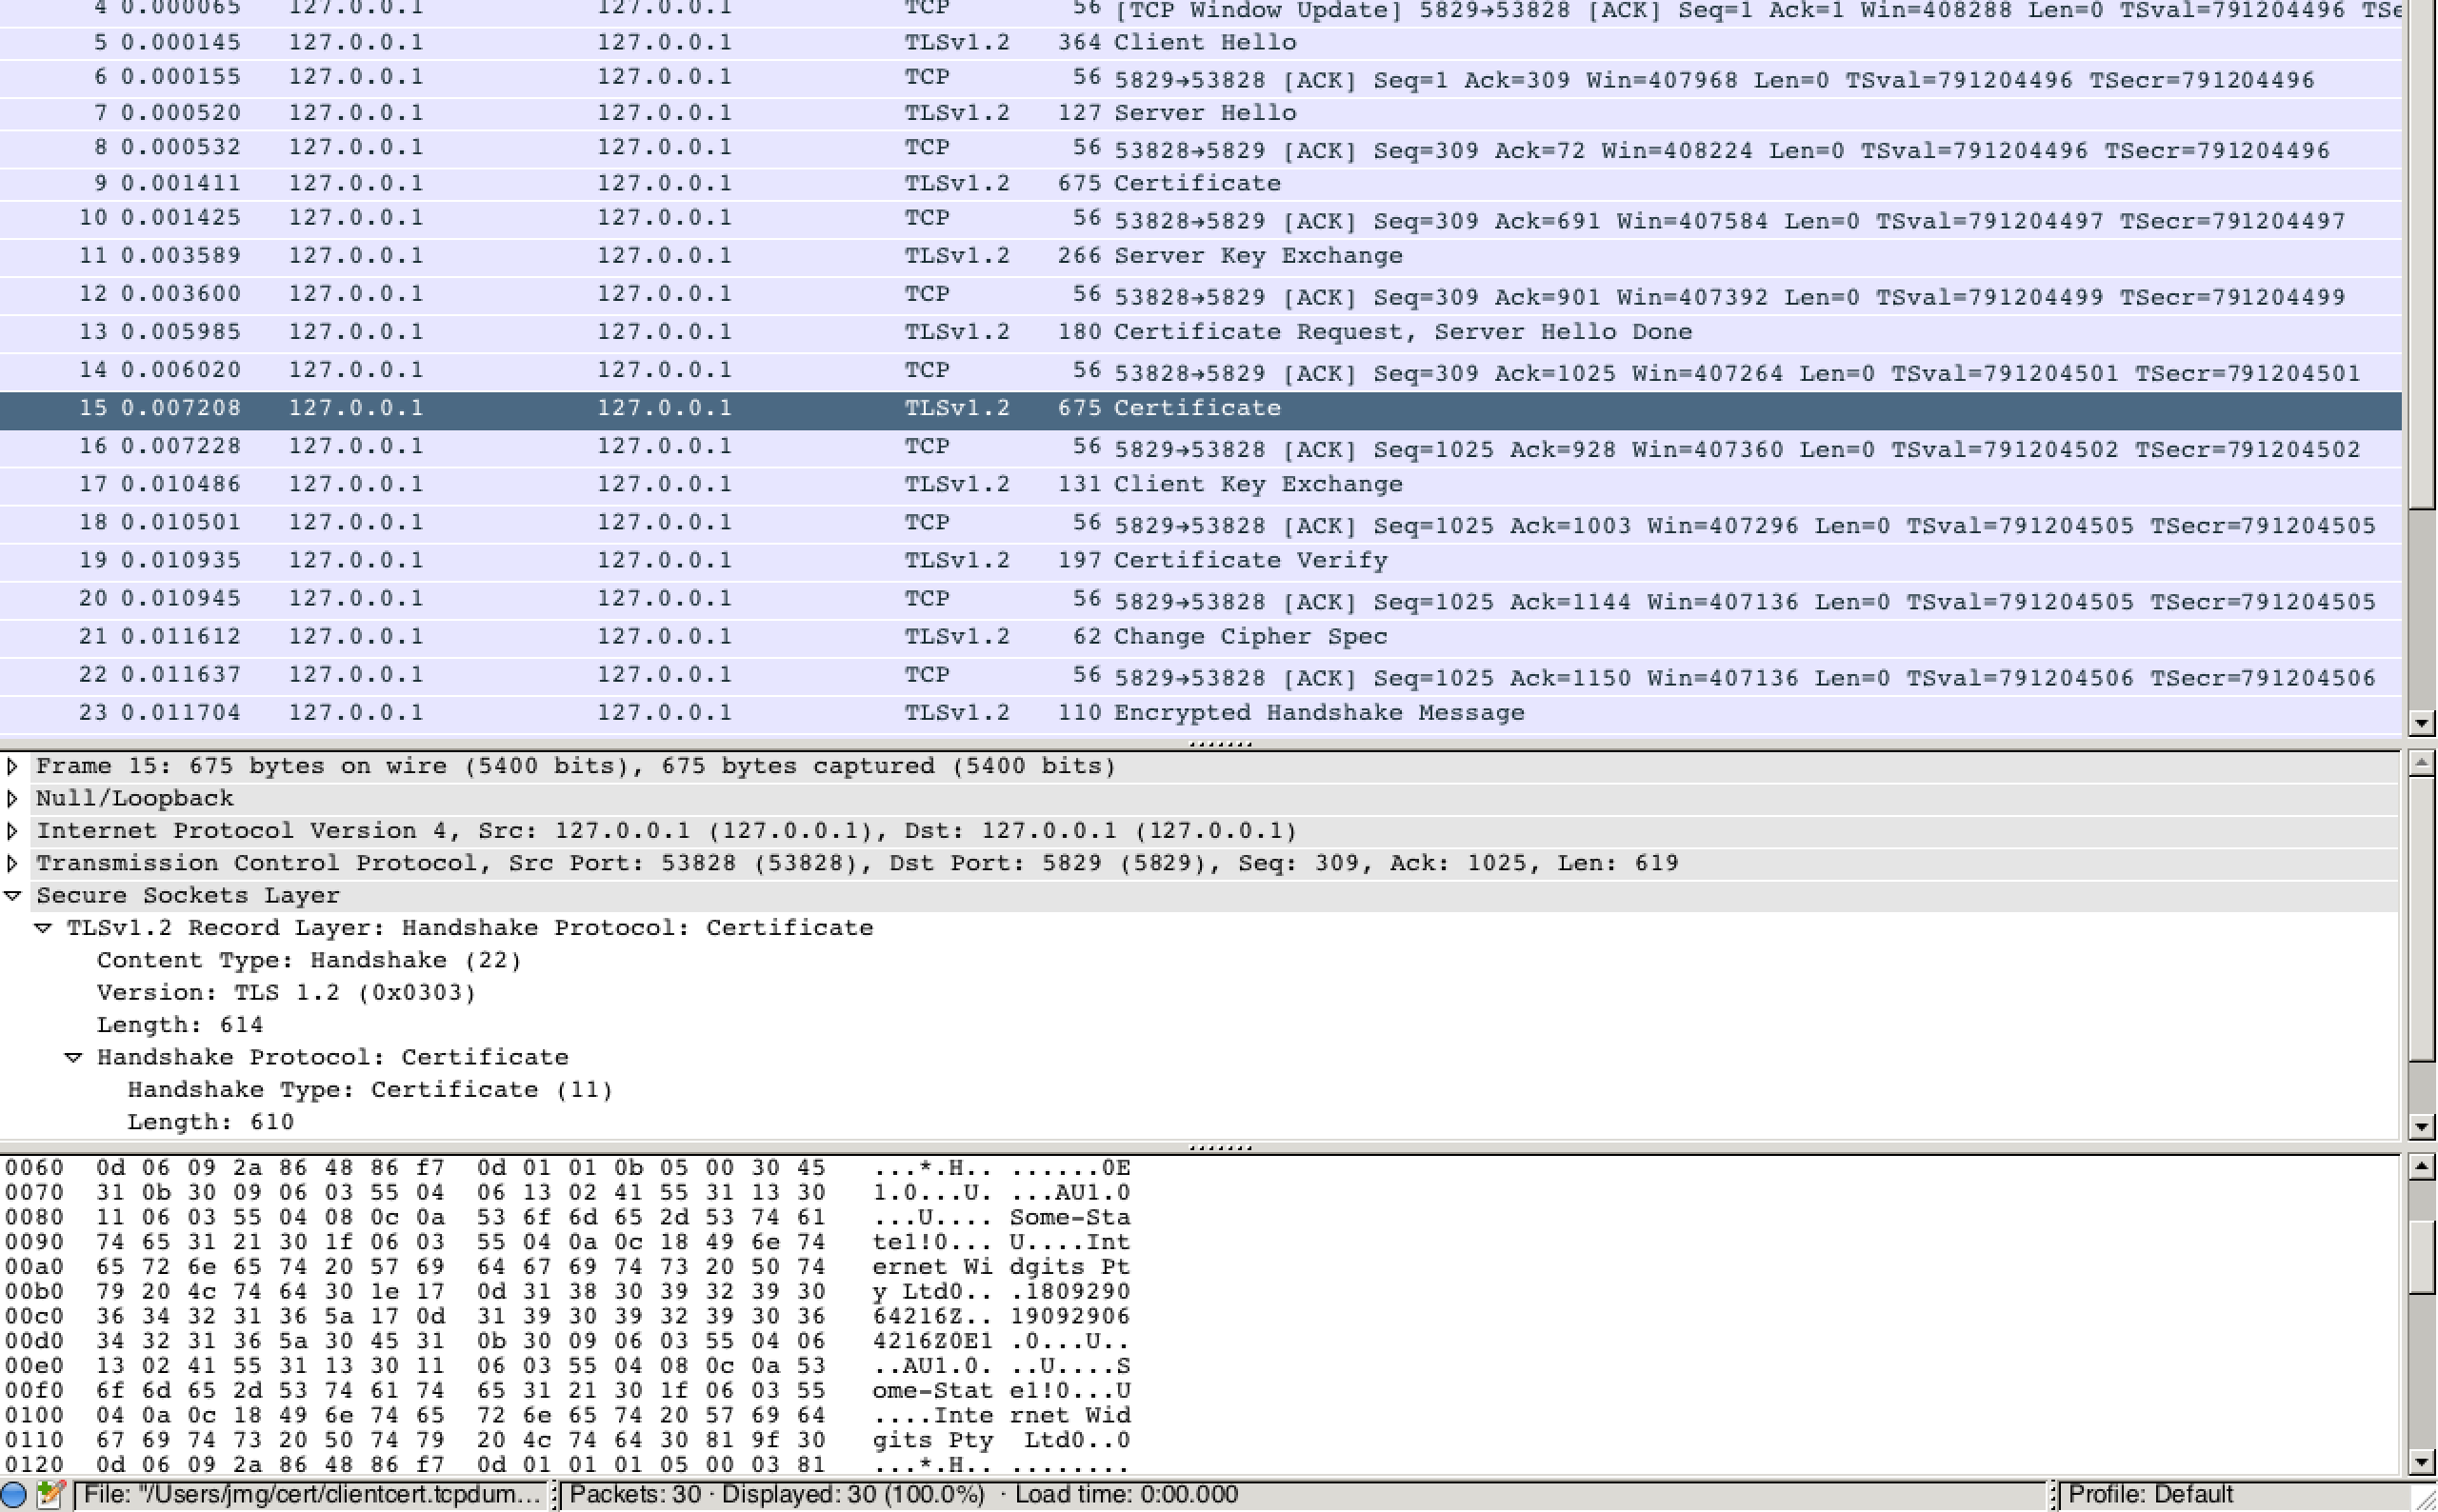 Wireshark shows TLS handshake with client authentication, with the client certificate displayed in plaintext.